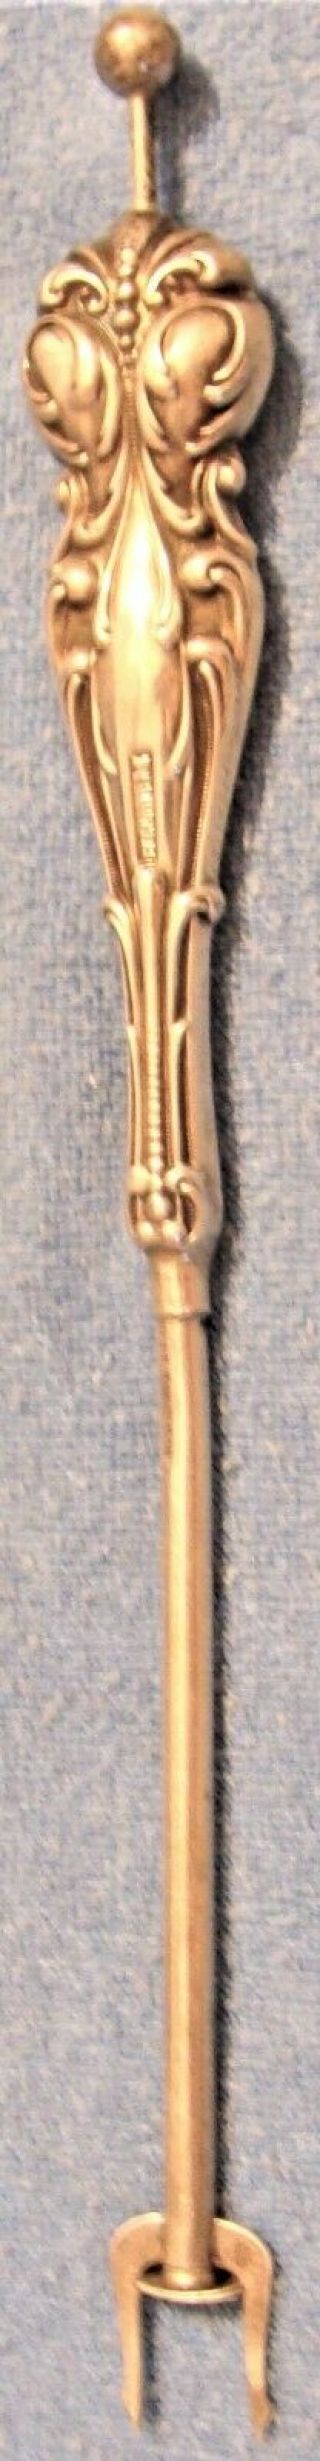 Rare Antique 1908 Unknown Ornate Pattern Sterling Silver Mechanical Olive Fork